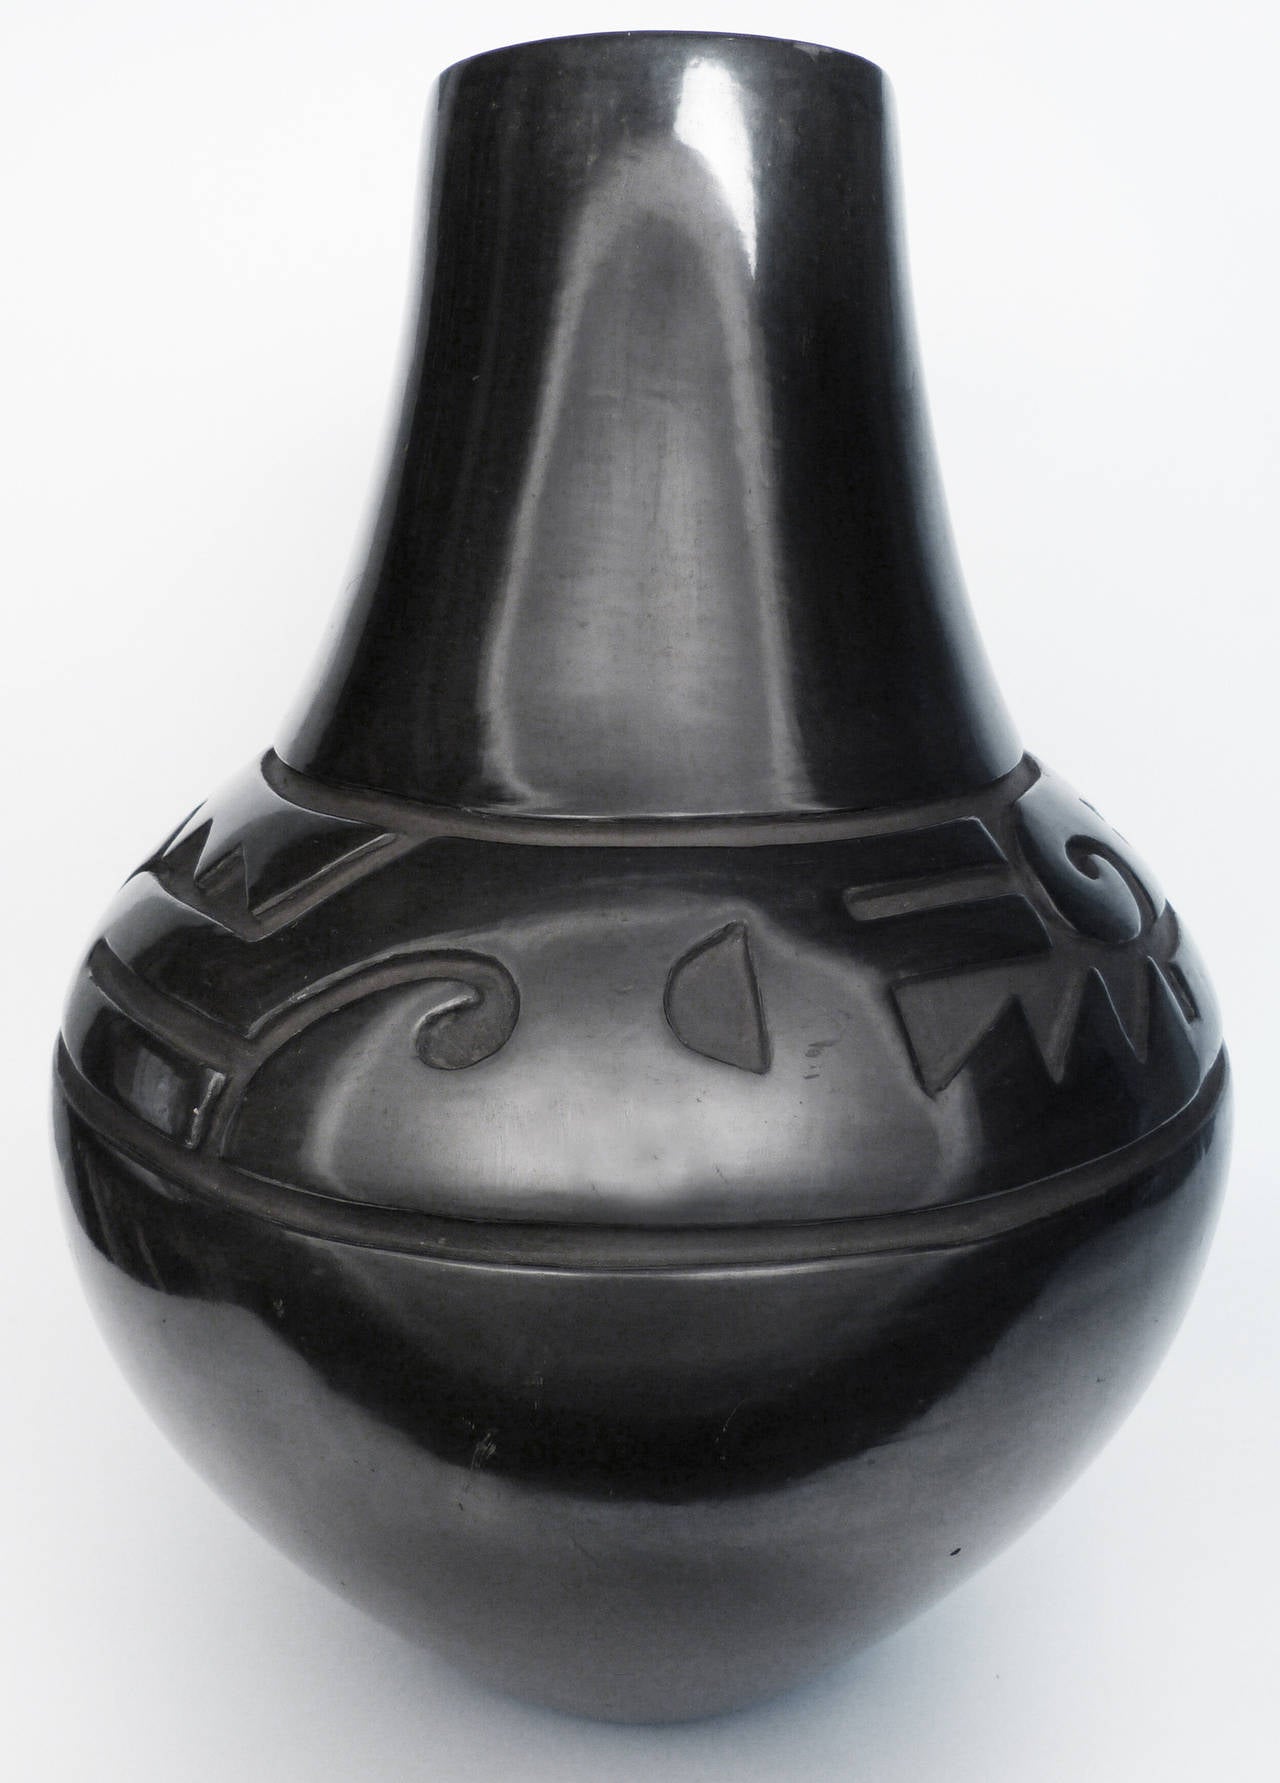 A traditionally made and fired large pot by master Santa Clara Pueblo potter Margaret Tafoya (1905-2001). Carved with traditional designs, and hand-polished with stones to a glossy black, this is a magnificent piece by one of the matriarchs of 20th